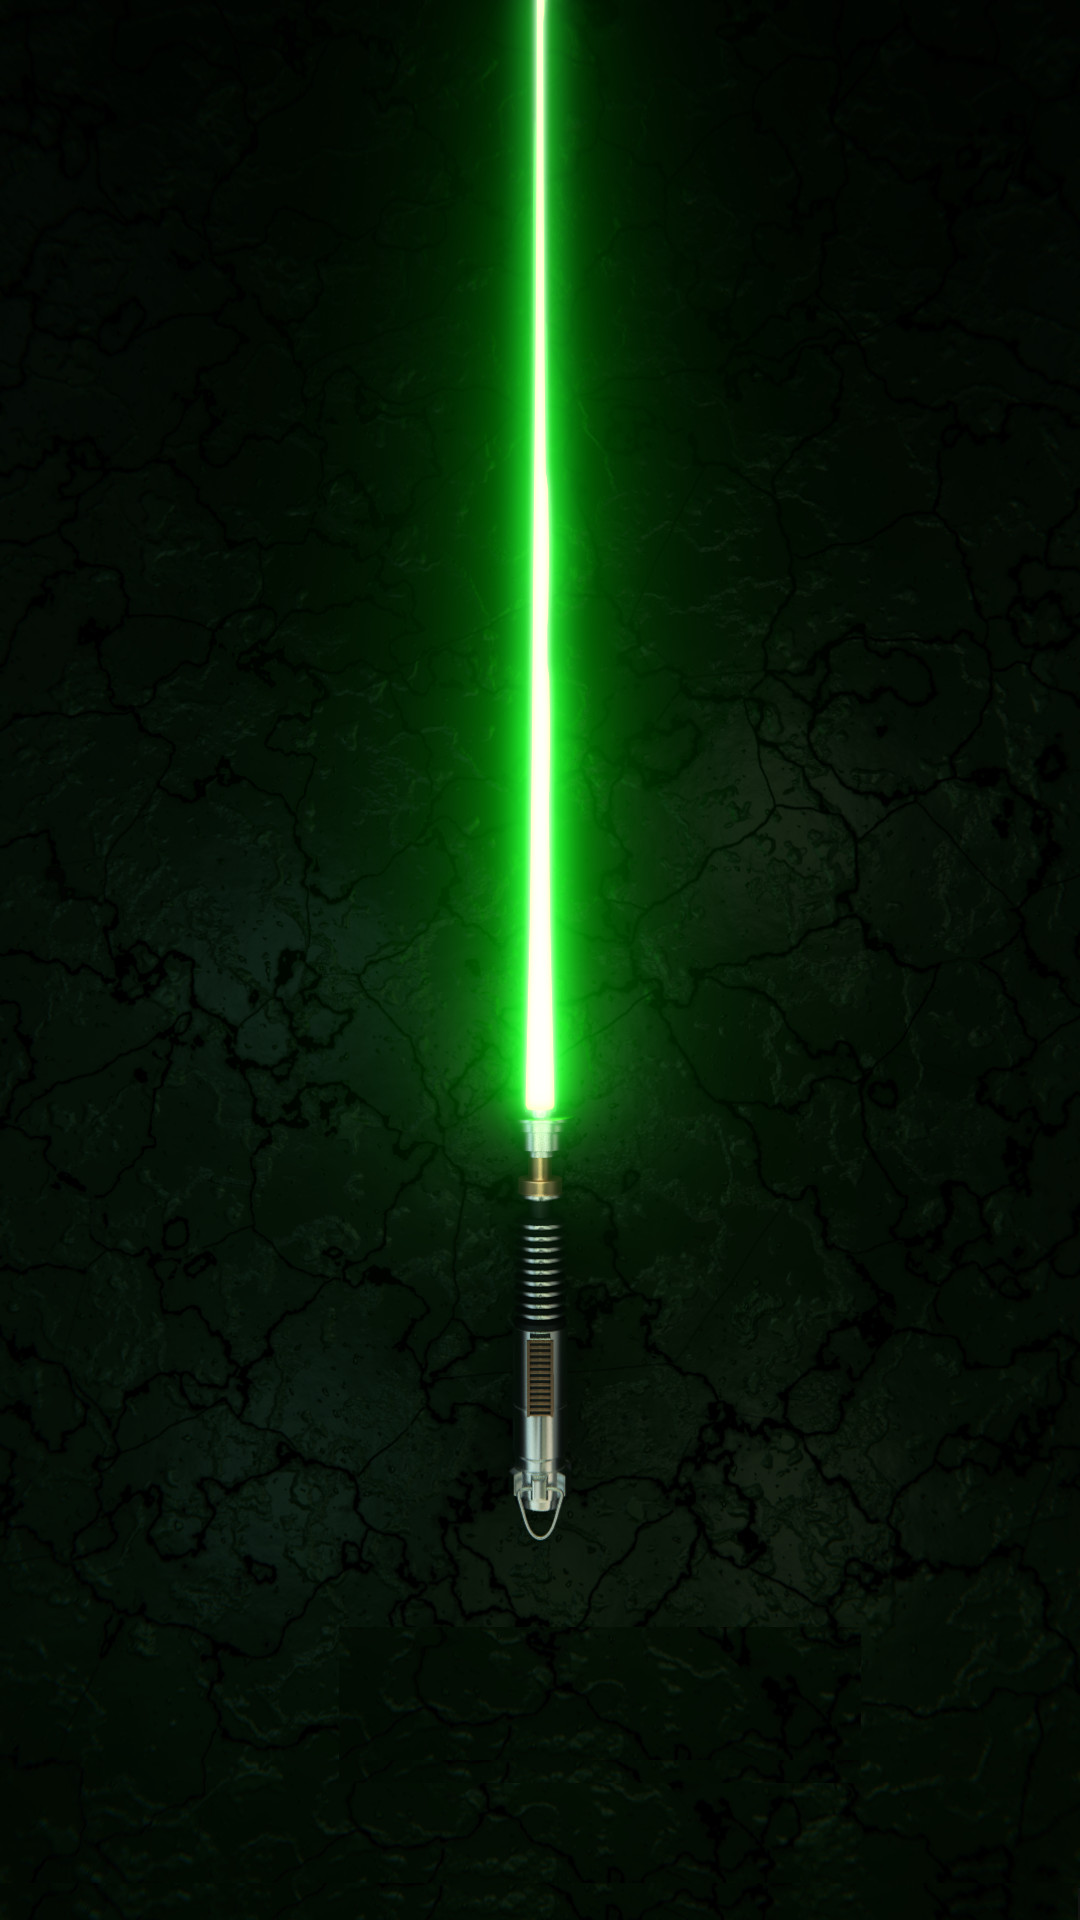 Star Wars Lightsaber – Tap to see more exciting Star Wars wallpaper mobile9